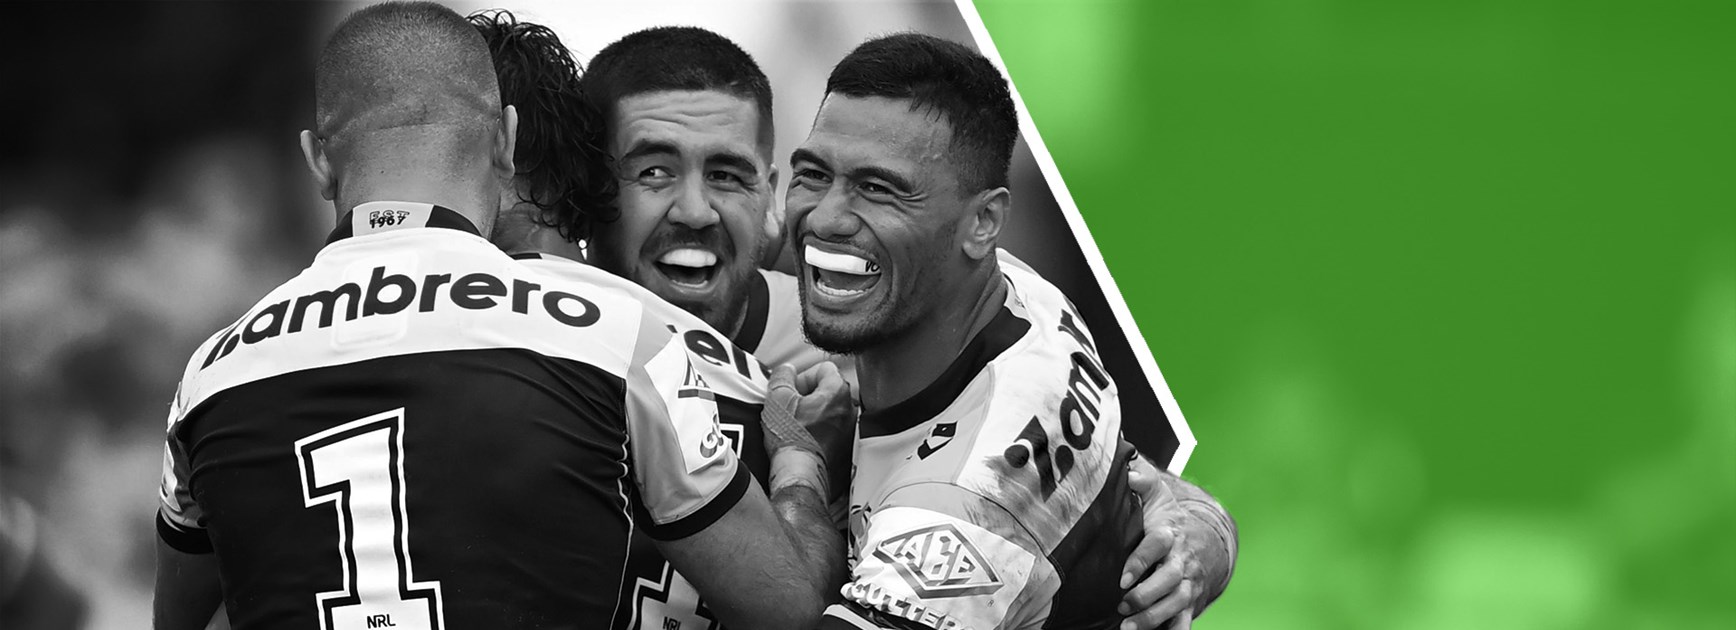 NRL Tipping: Expert tips for Round 2